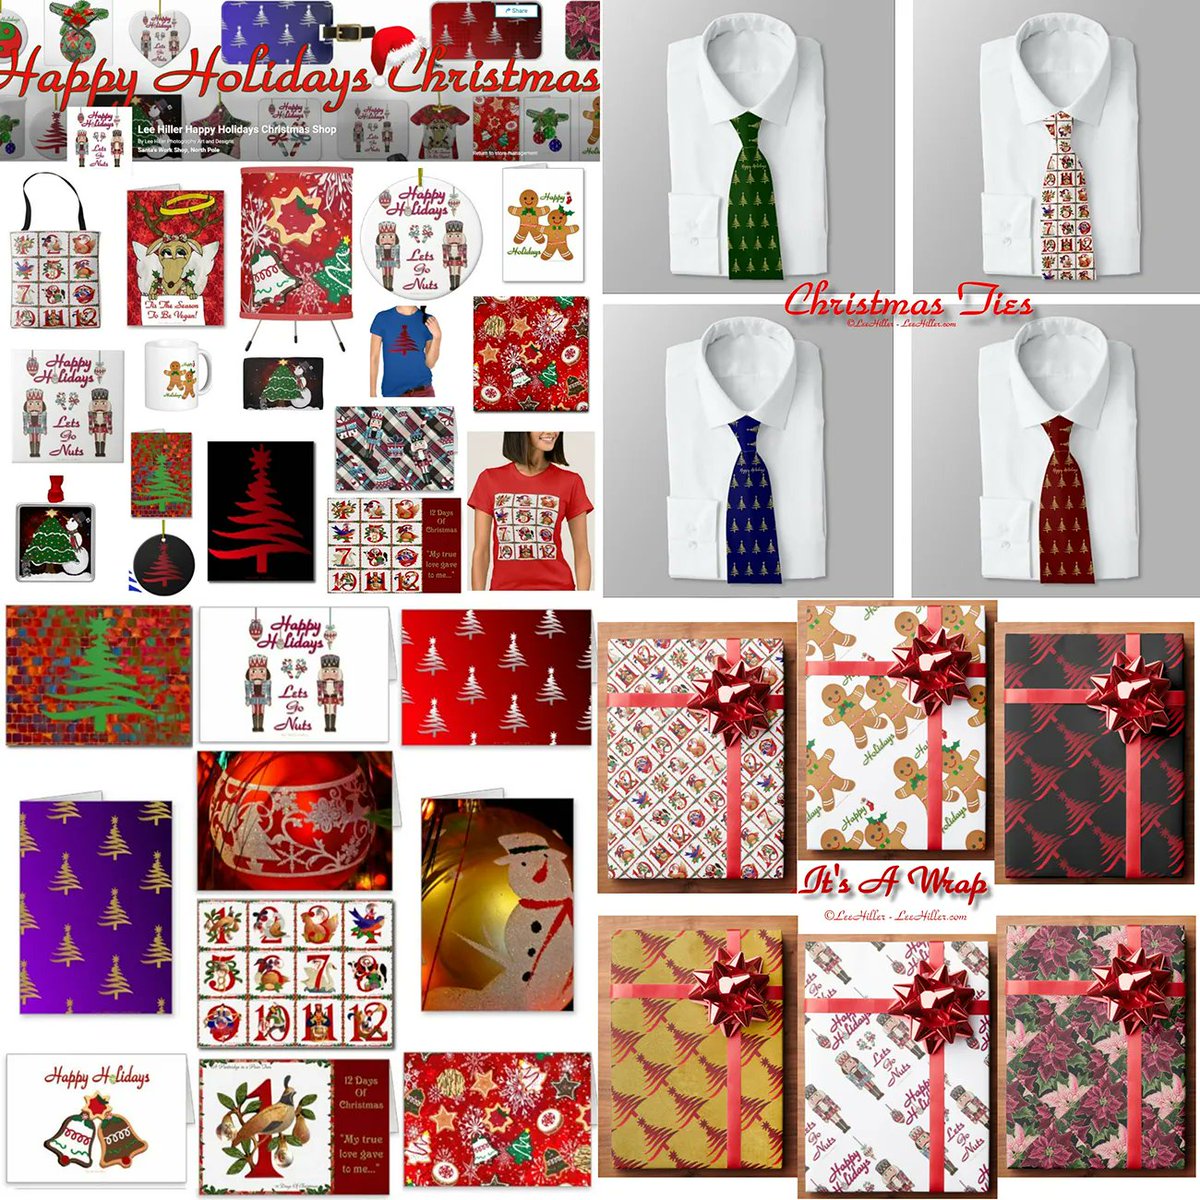 🌟🎄🎁🎄🎁🎄🌟
The #HappyHolidays Shop is Always Open!
#Christmas #12DaysOfChristmas #ChristmasTree #snowflake #Nutcracker #poinsettia #Gingerbread #holidaycheer #Christmas2023 #holidaydecor #gifts #giftideas #homedecor #scapbooking #crafting

buff.ly/3NuLmAh